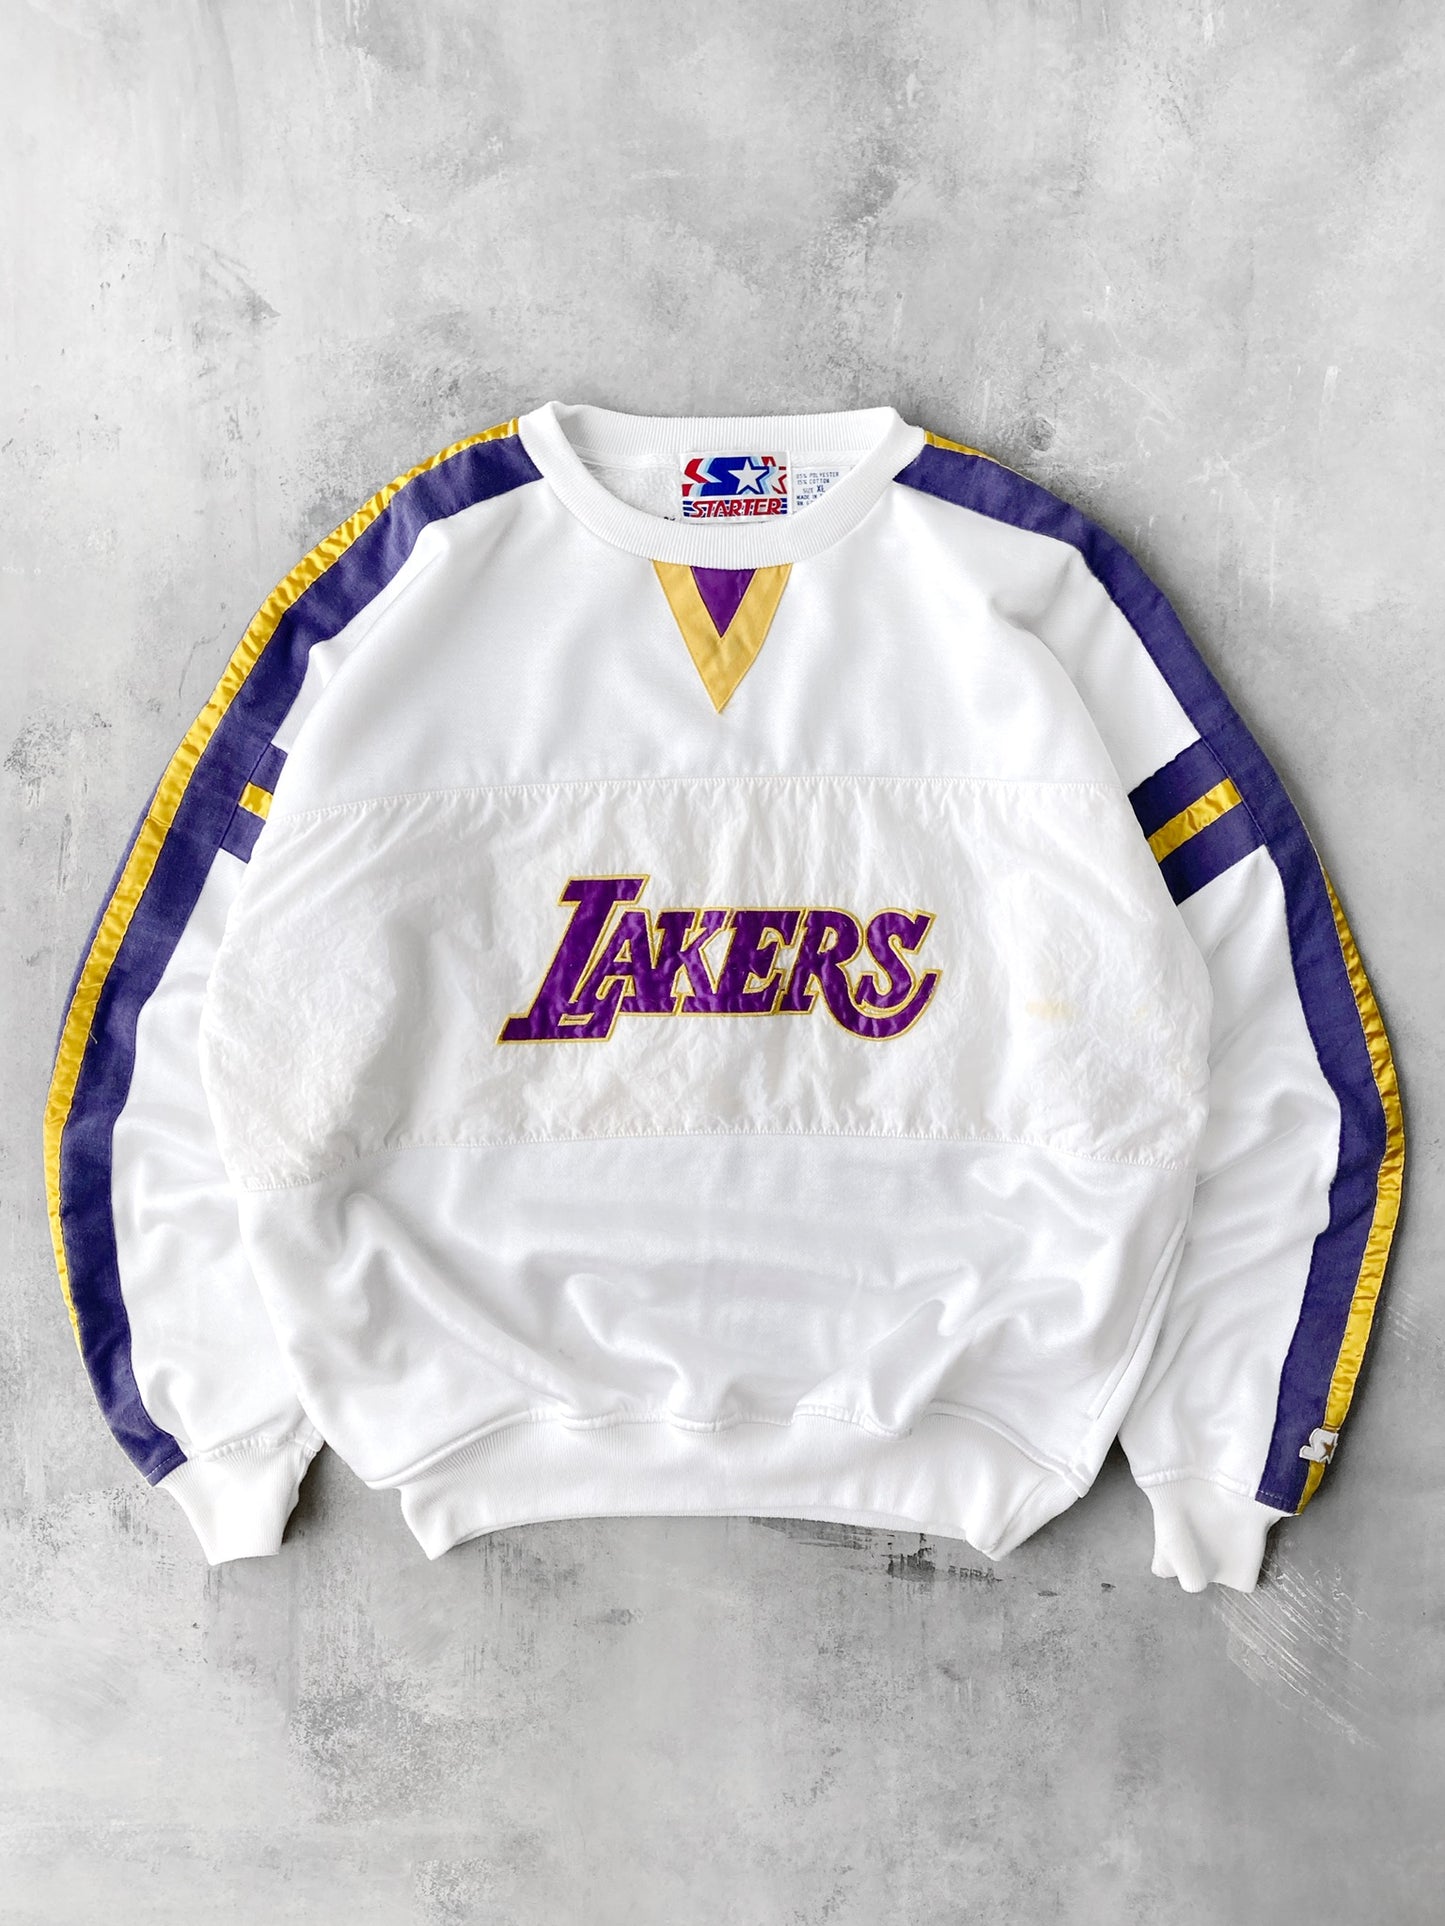 Los Angeles Lakers Pullover Jacket 80's - XL